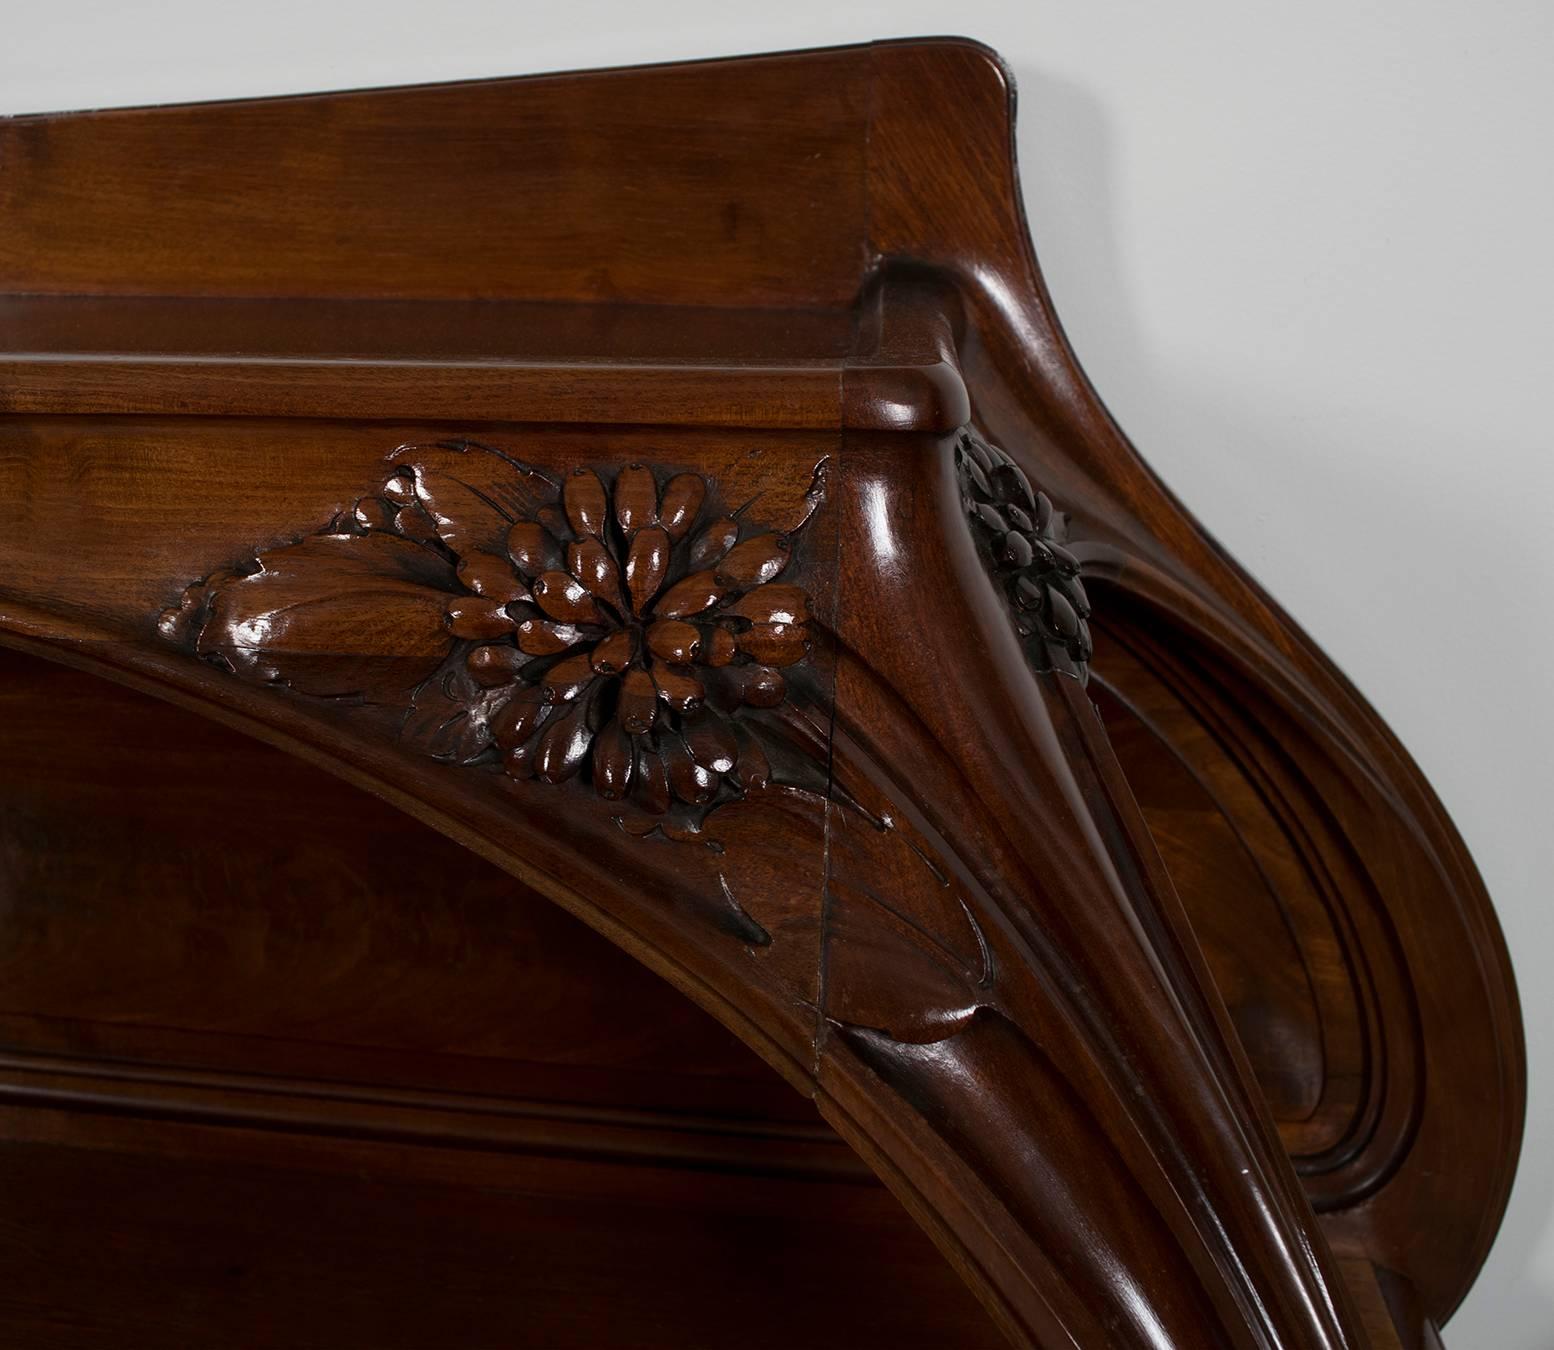 A Louis Majorelle French Art Nouveau period mahogany buffet "Vicorne," with carved decoration, circa 1900.

Majorelle (1859-1926) was a French decorator and furniture designer who manufactured his own designs in the French tradition of